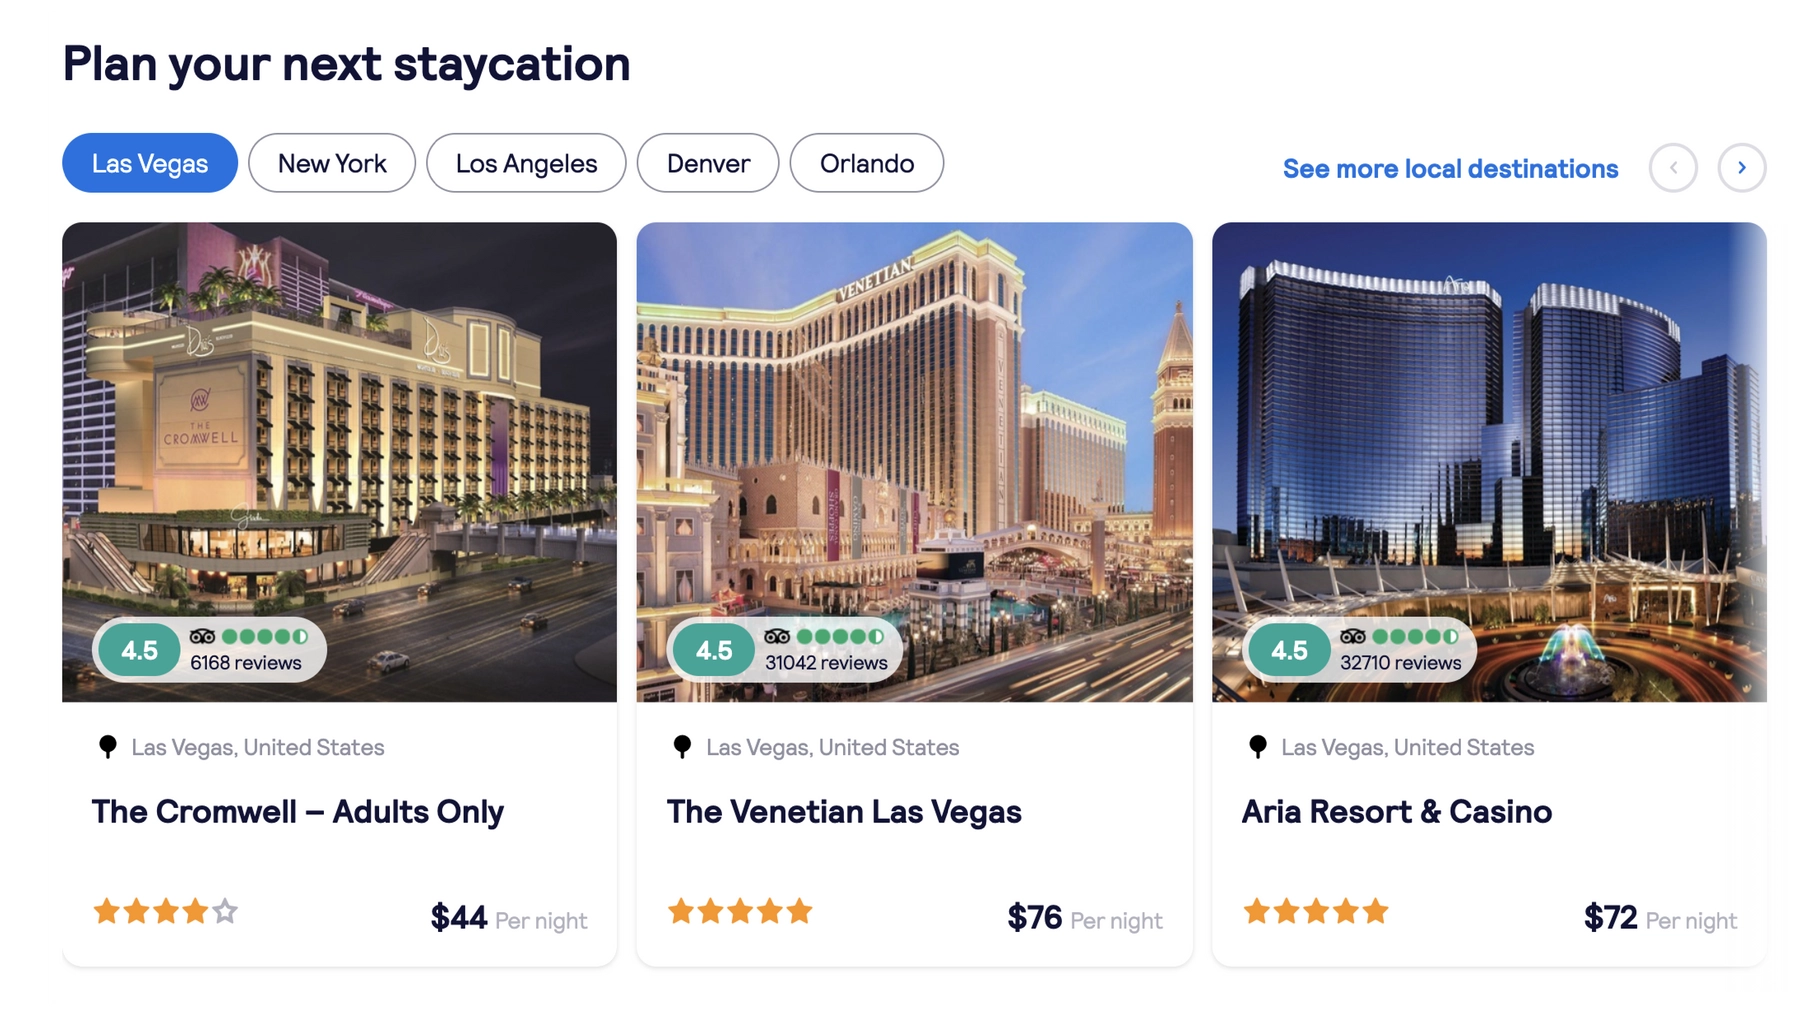 How to Find the Best Hotel Deals